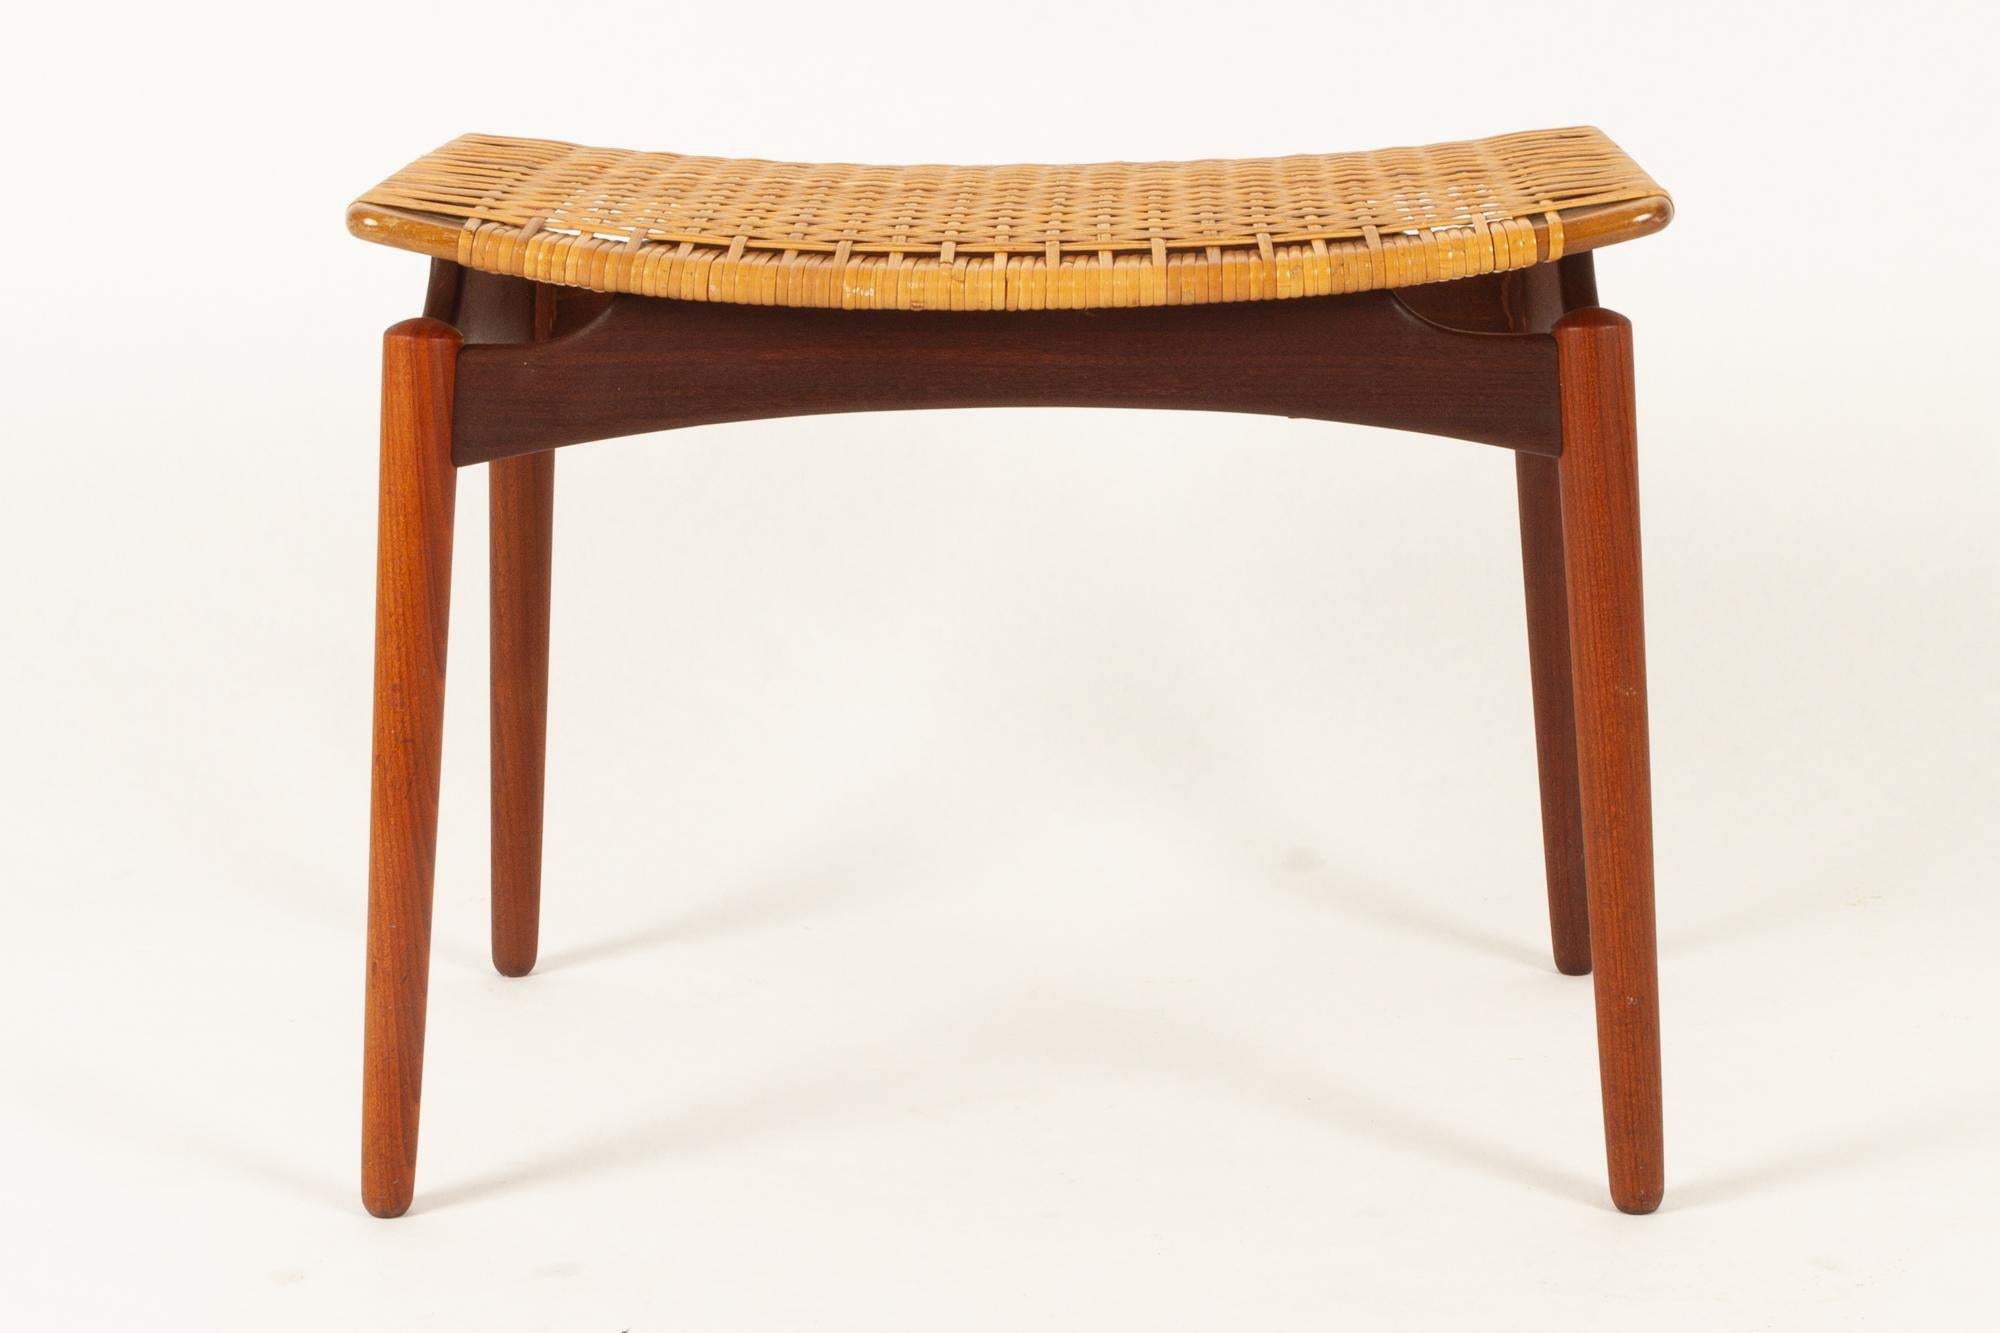 Danish teak and cane stool from Ølholm Møbelfabrik, 1950s
Stylish and elegant Mid-Century Modern footstool in solid teak with cane seat. Round tapered legs and curved seat. The recessed corners gives the seat a floating appearance. A very beautiful